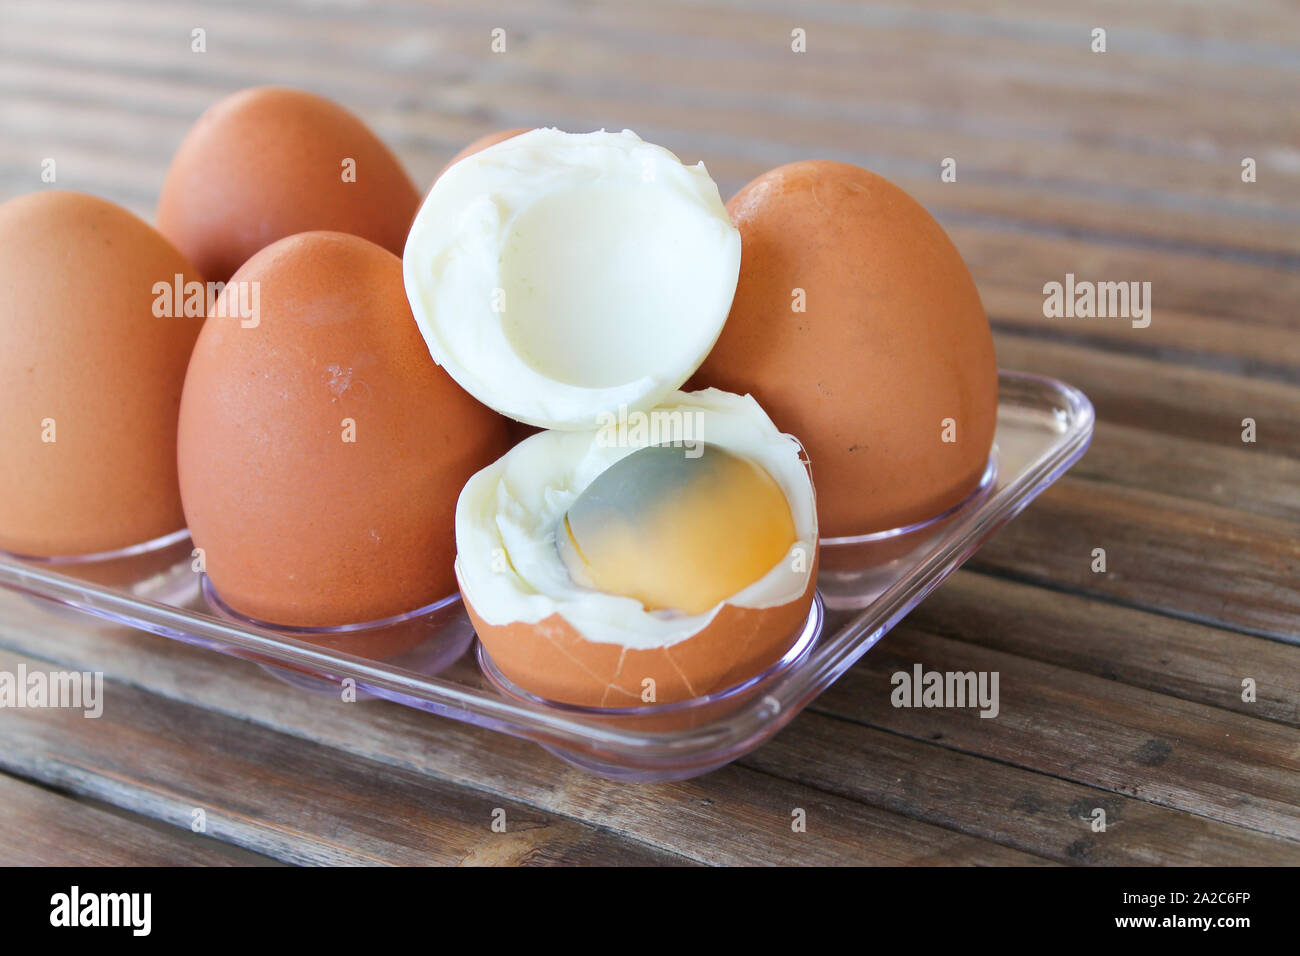 close up Six brown eggs in plastic box on bamboo table with one broken boiled egg, top view. Stock Photo